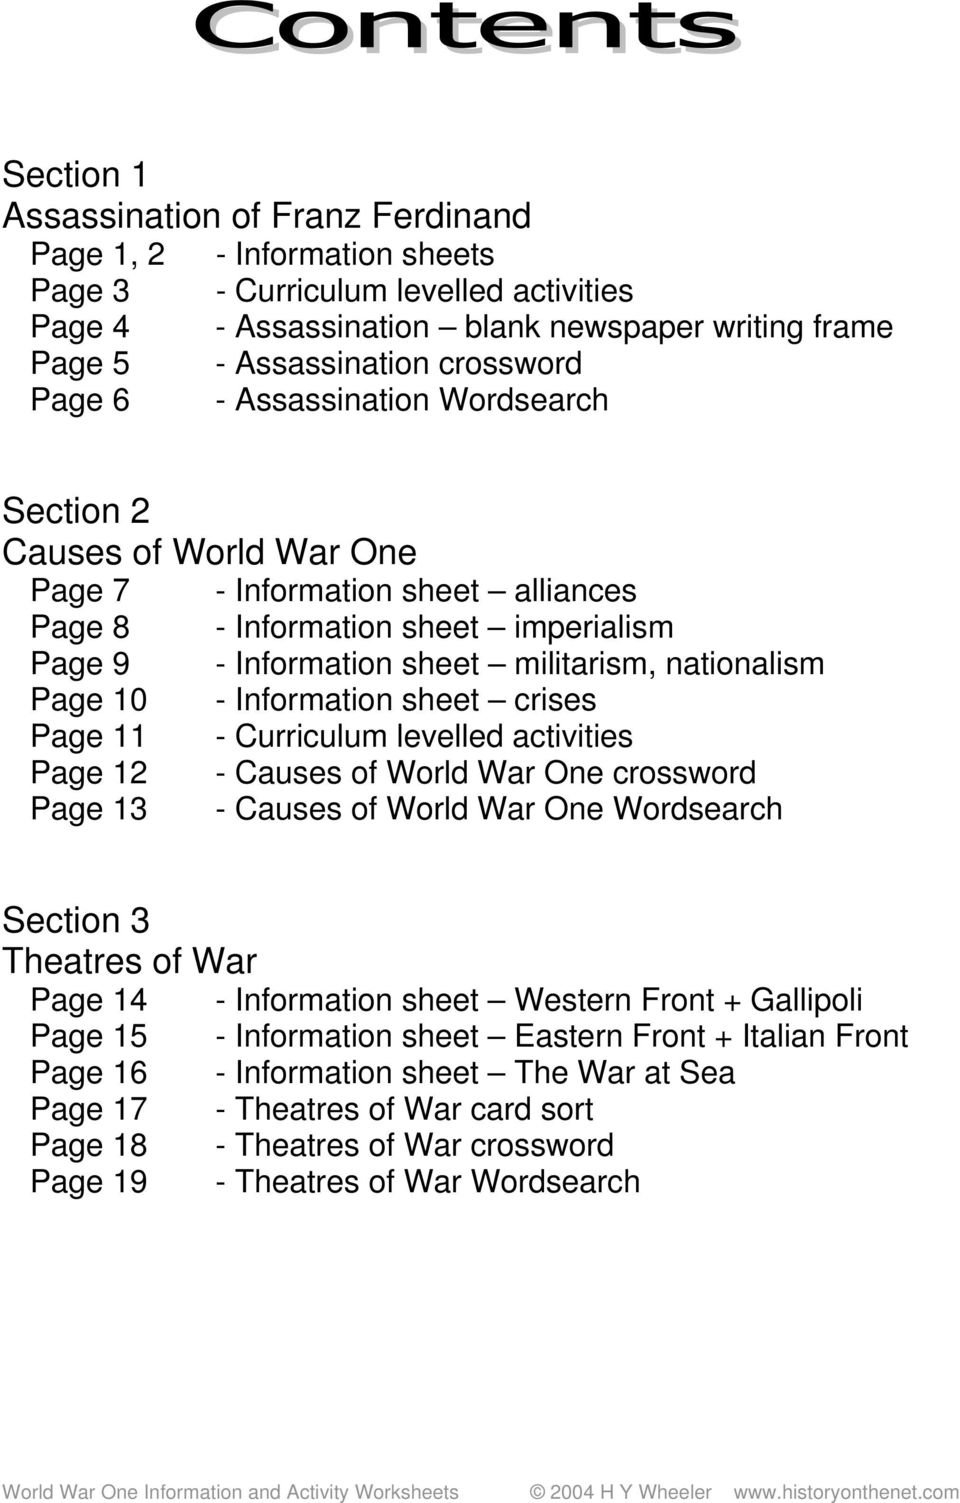 World War One Information And Activity Worksheets  Pdf Within World War 2 Worksheets With Answers